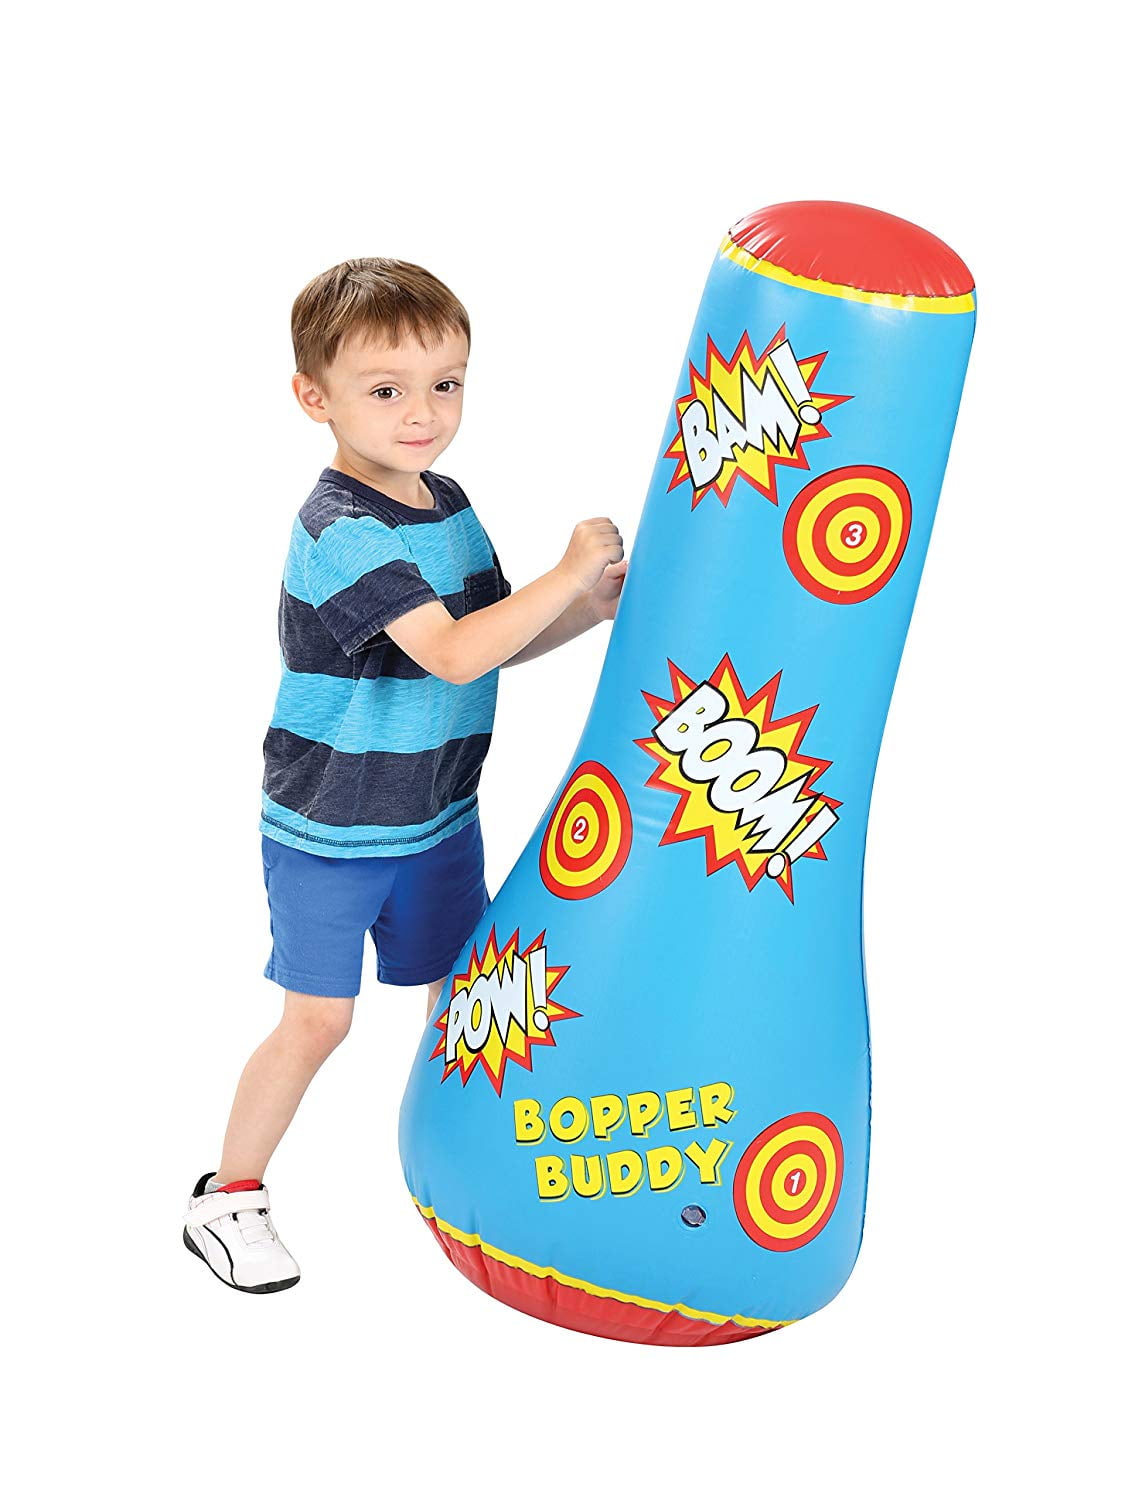 ETNA Products Inflatable Punching Bag for Kids: Free Standing Boxing Toy for Children, Air Bop Bag for Boys & Girls, Exercise & Stress Relief